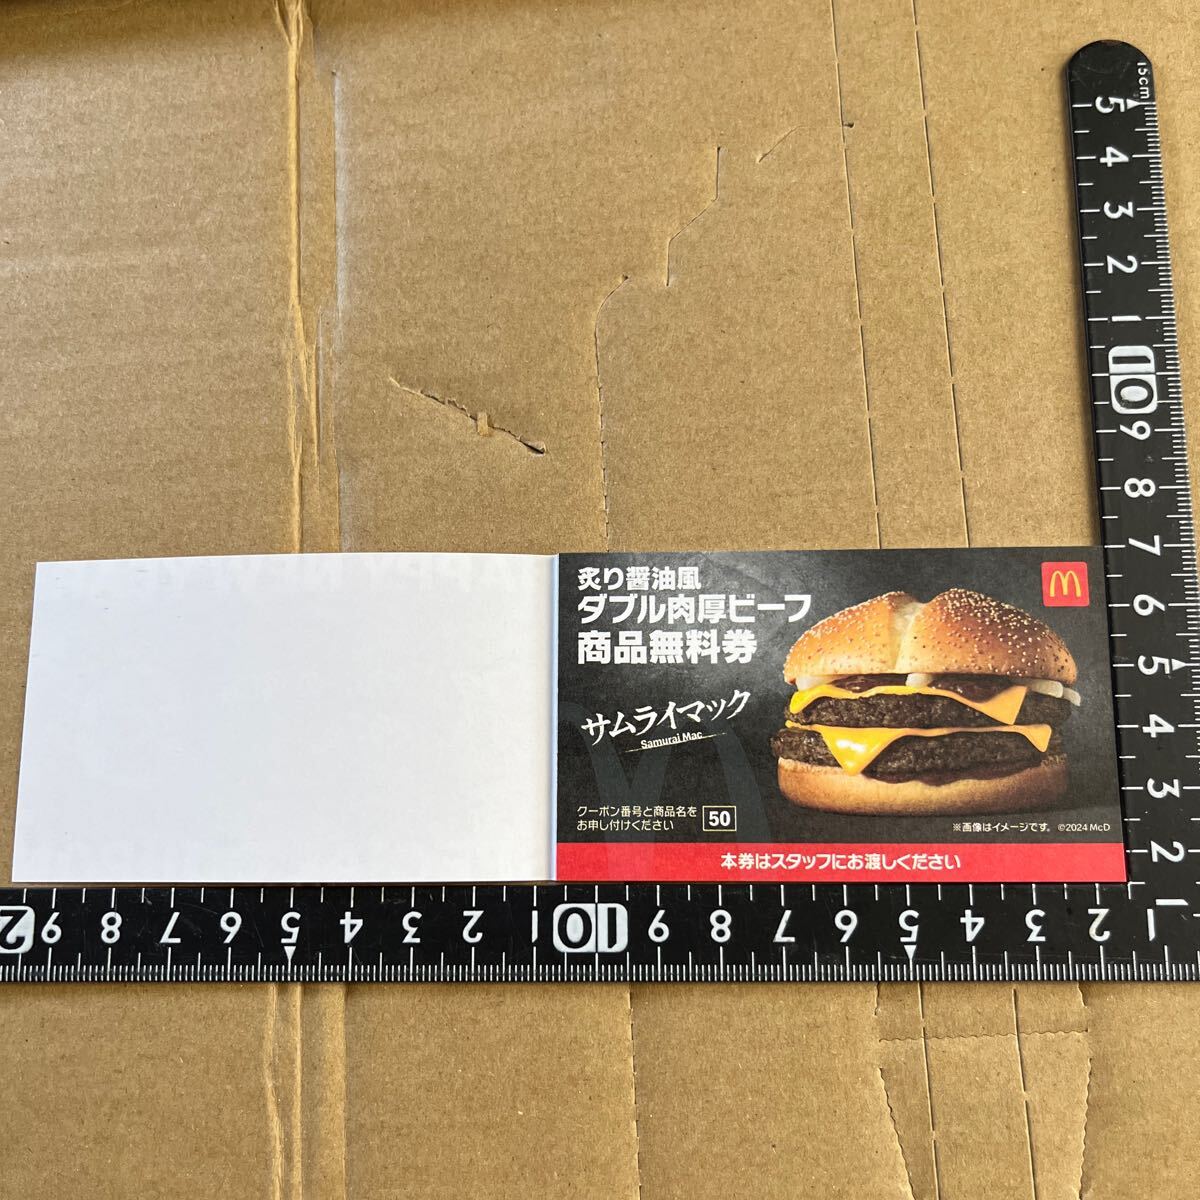  McDonald's lucky bag commodity free ticket shop front selling price 3,430 jpy corresponding 